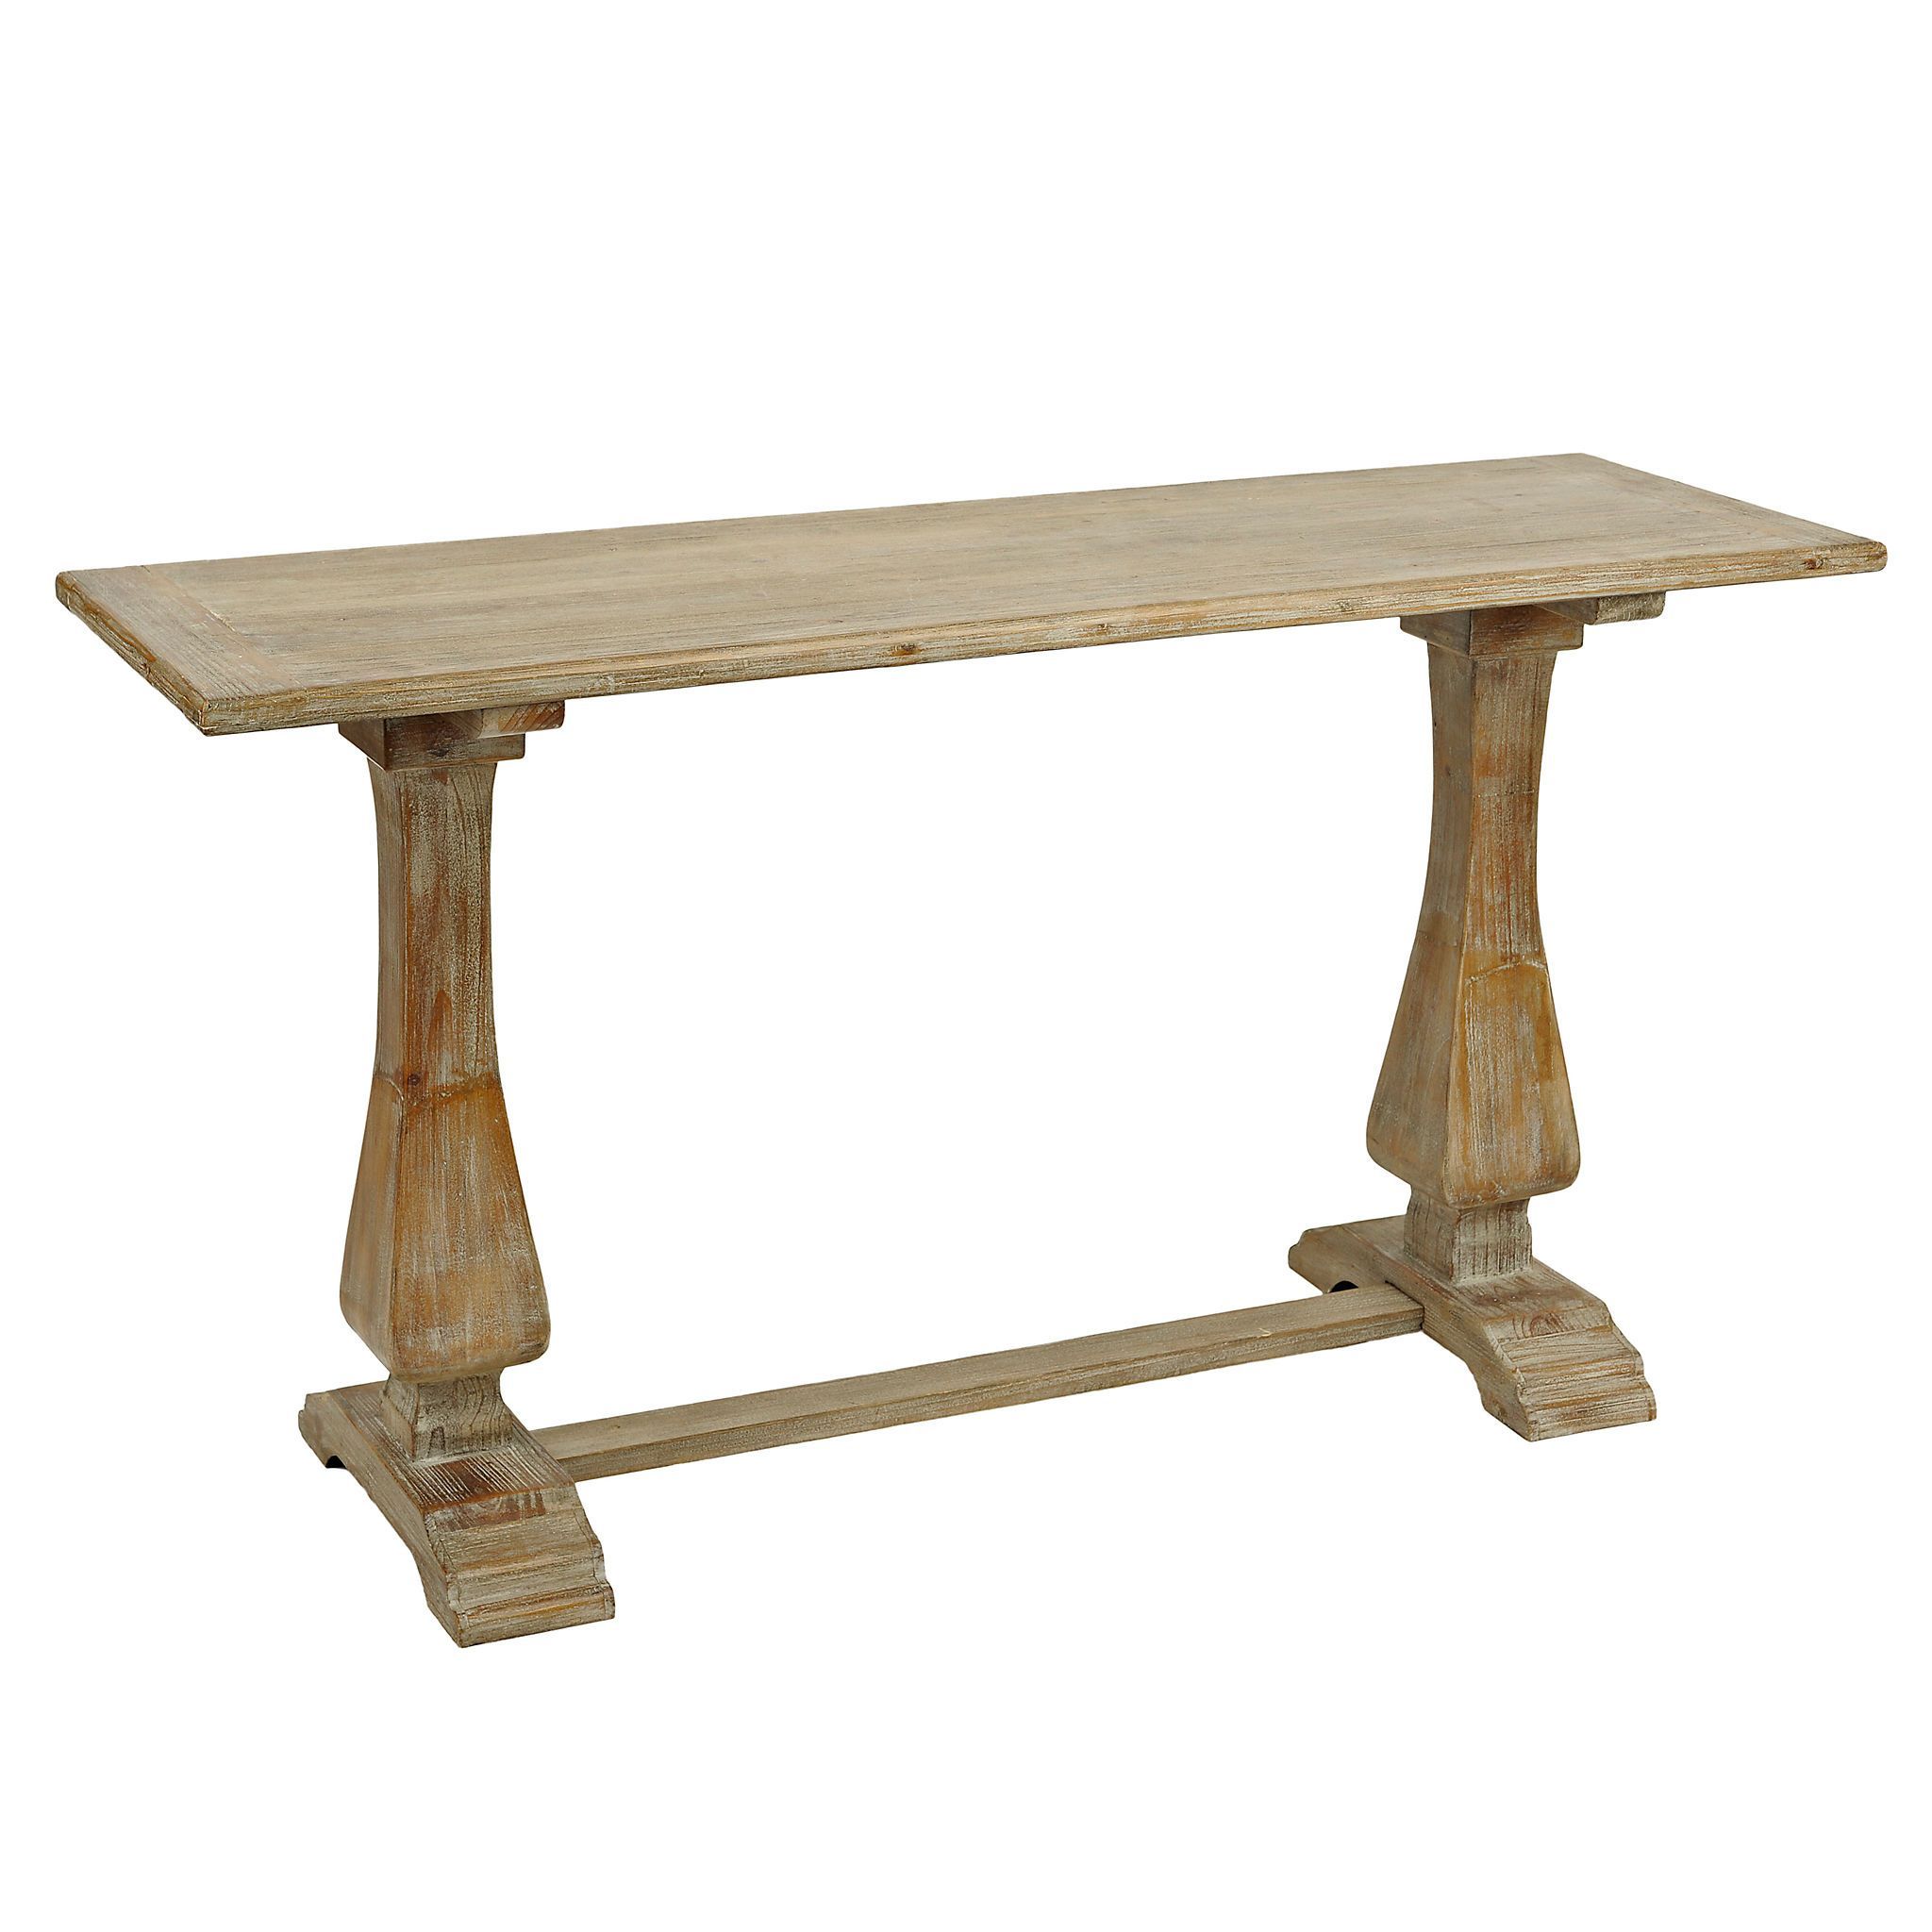 Distressed Natural Wooden Console Table | Wooden Console Intended For Natural Wood Console Tables (View 7 of 20)